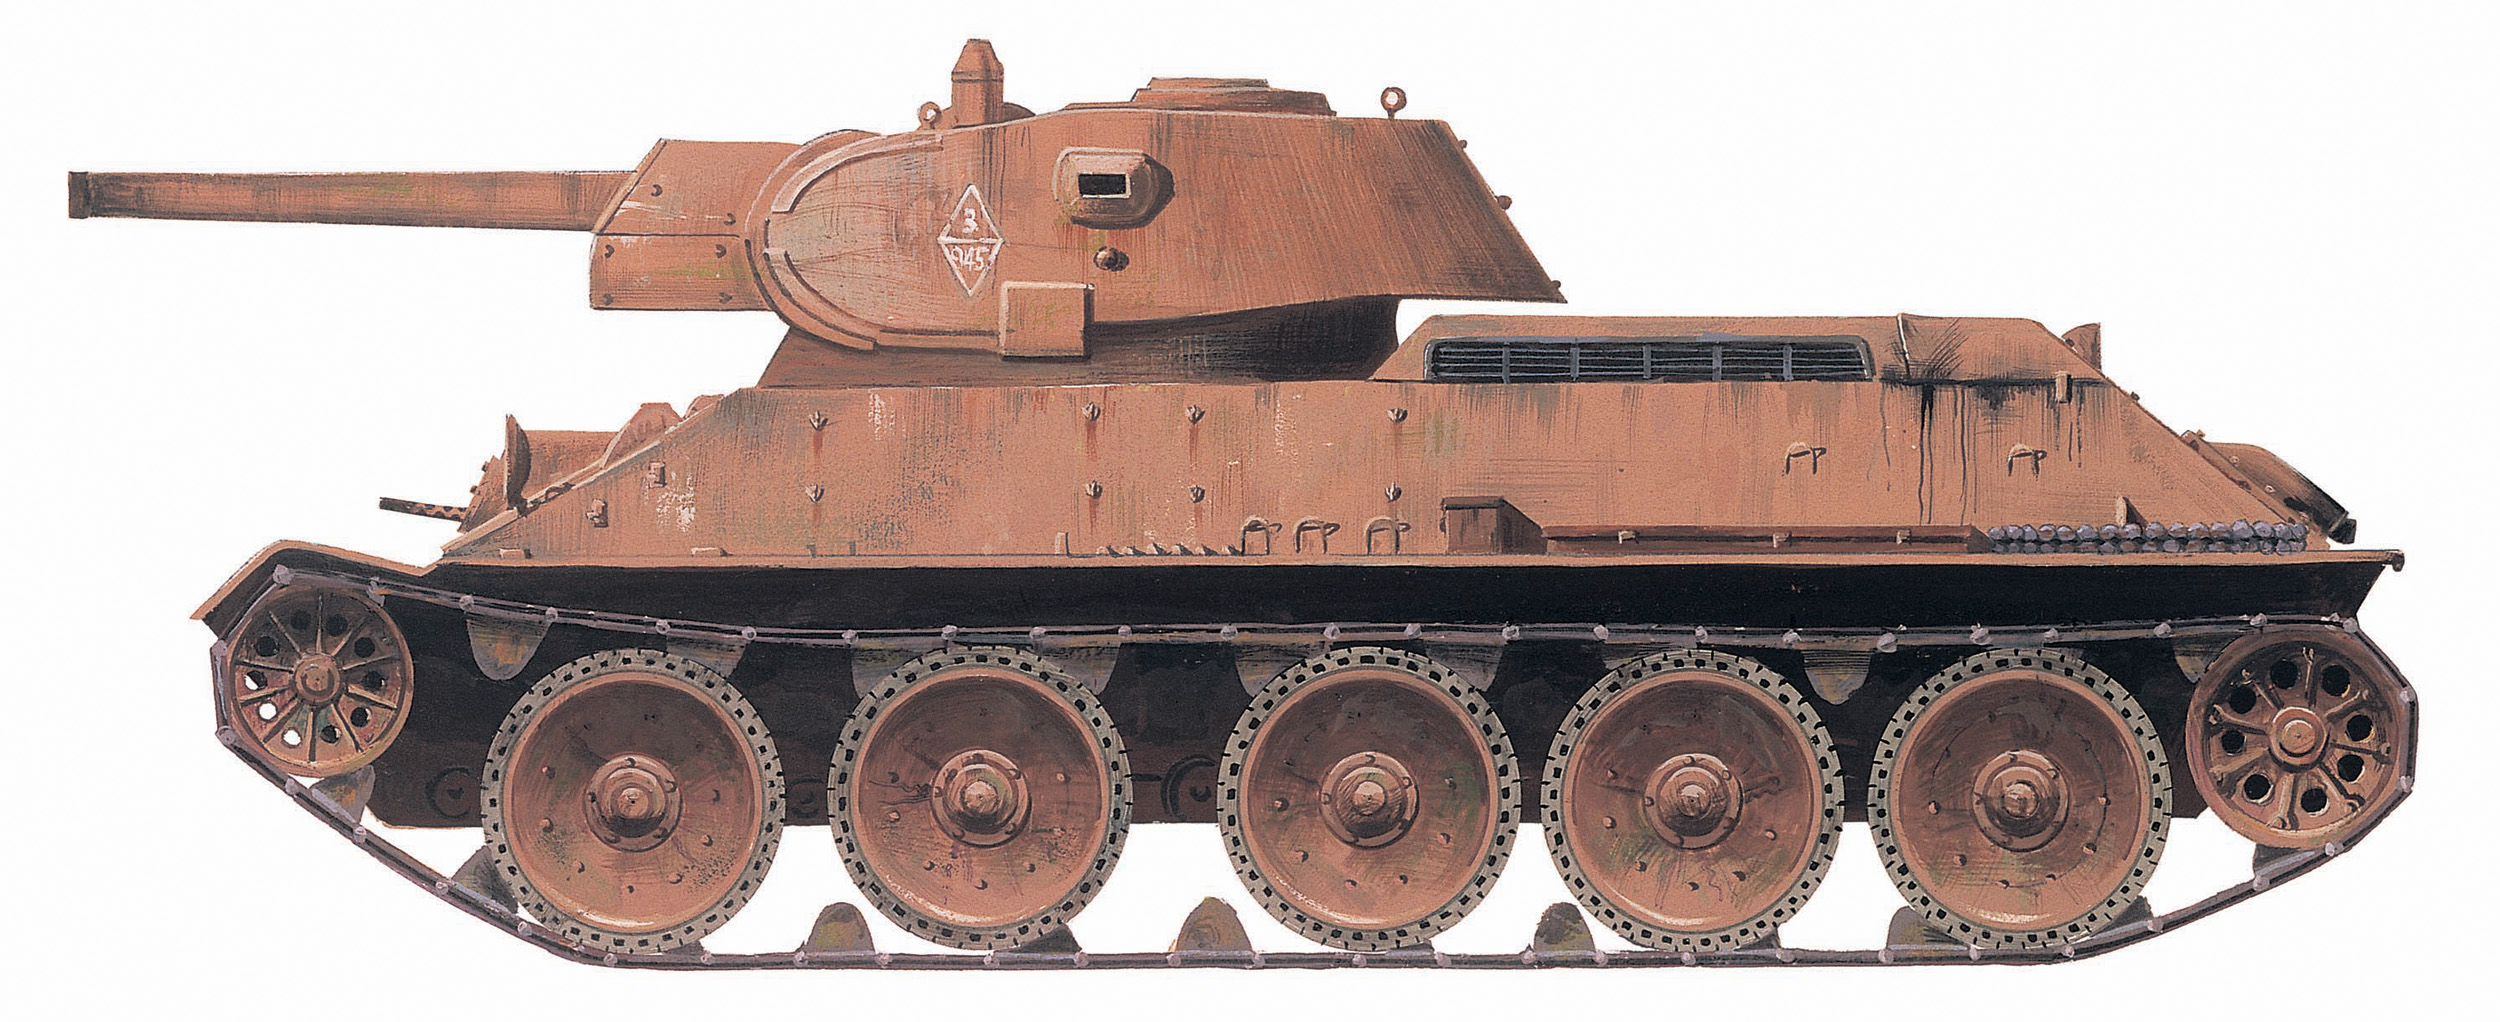 Arguably the finest all-around battle tank of World War II, the Soviet T-34 mounted a 76.2mm main gun and reached the Eastern Front in large numbers.